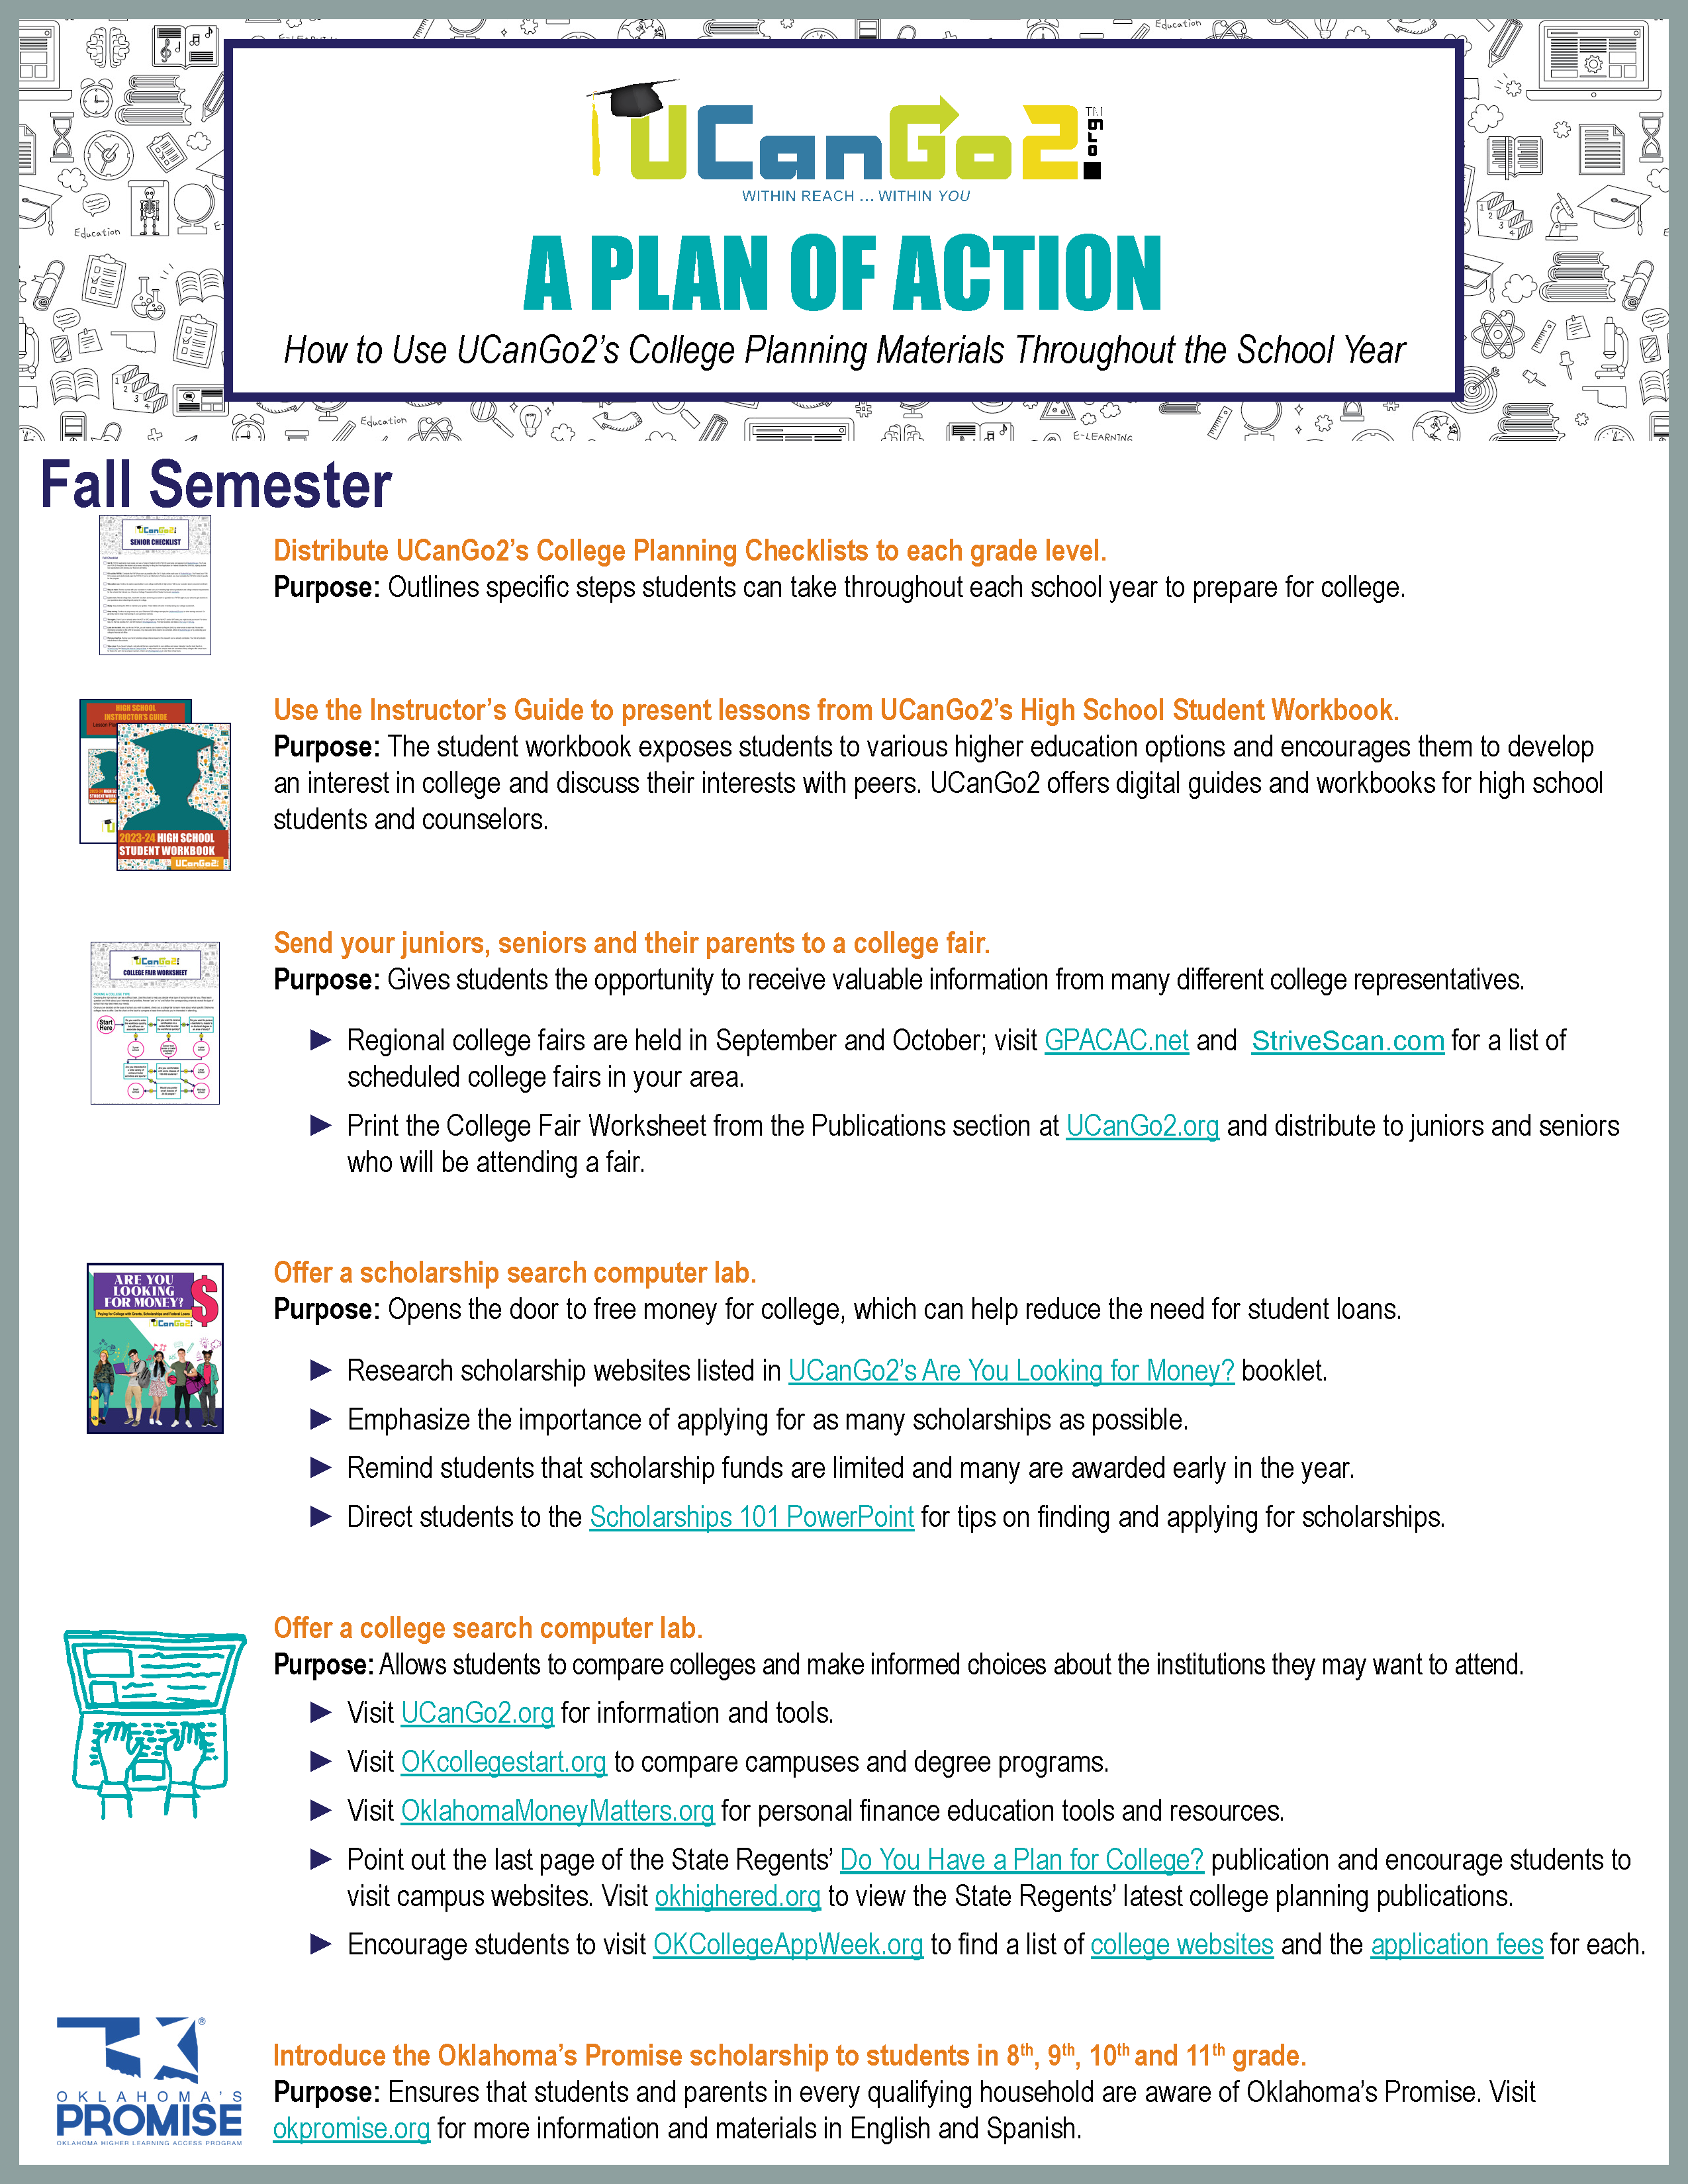 PDF of A Plan of Action